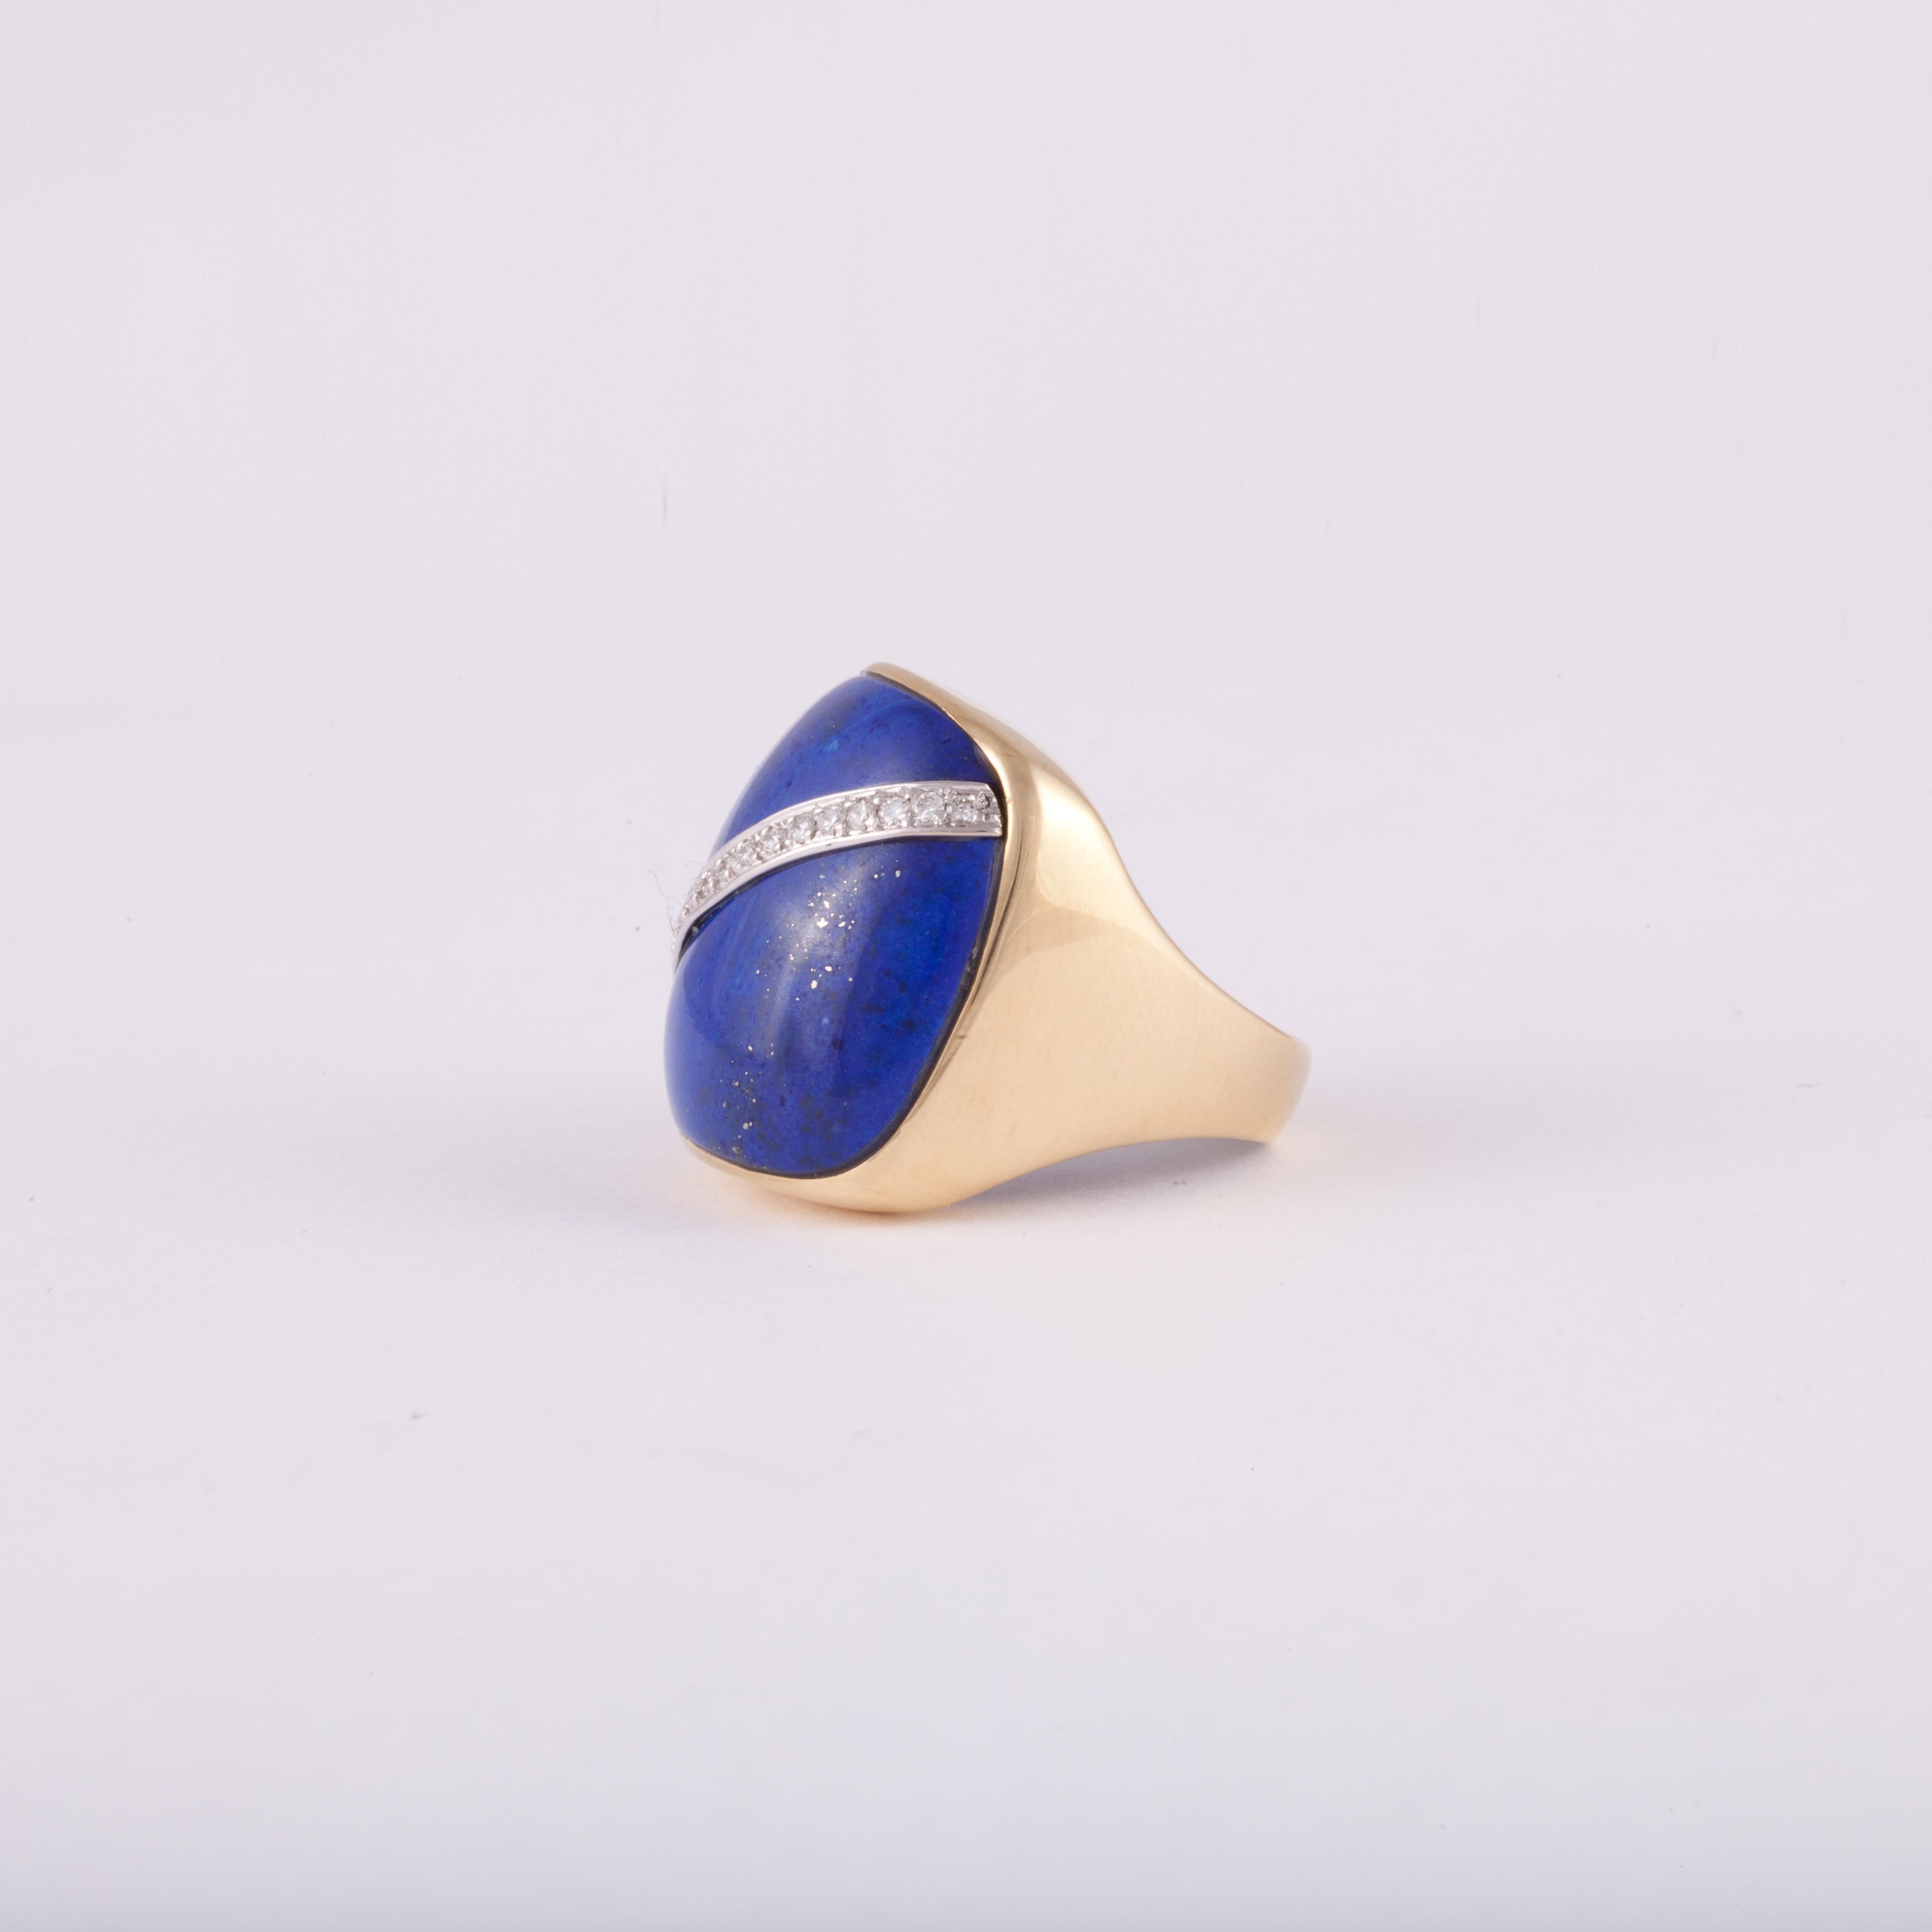 Ring composed of 18K yellow gold featuring lapis lazuli accented by round diamonds.  The ring is marked 